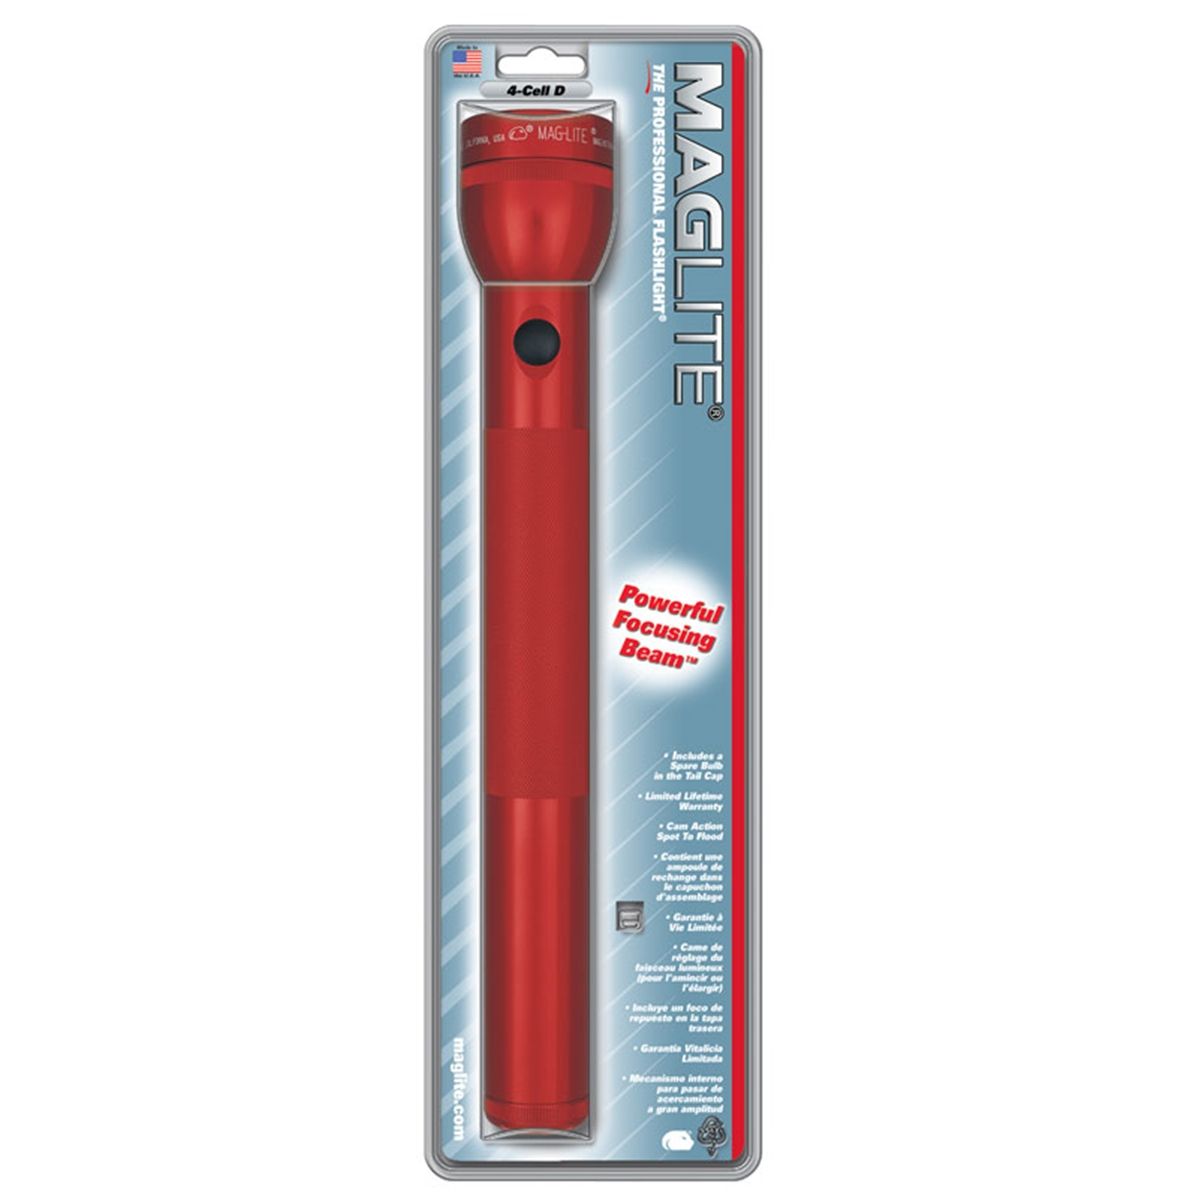 Flashlight - 4 D-Cell - Red